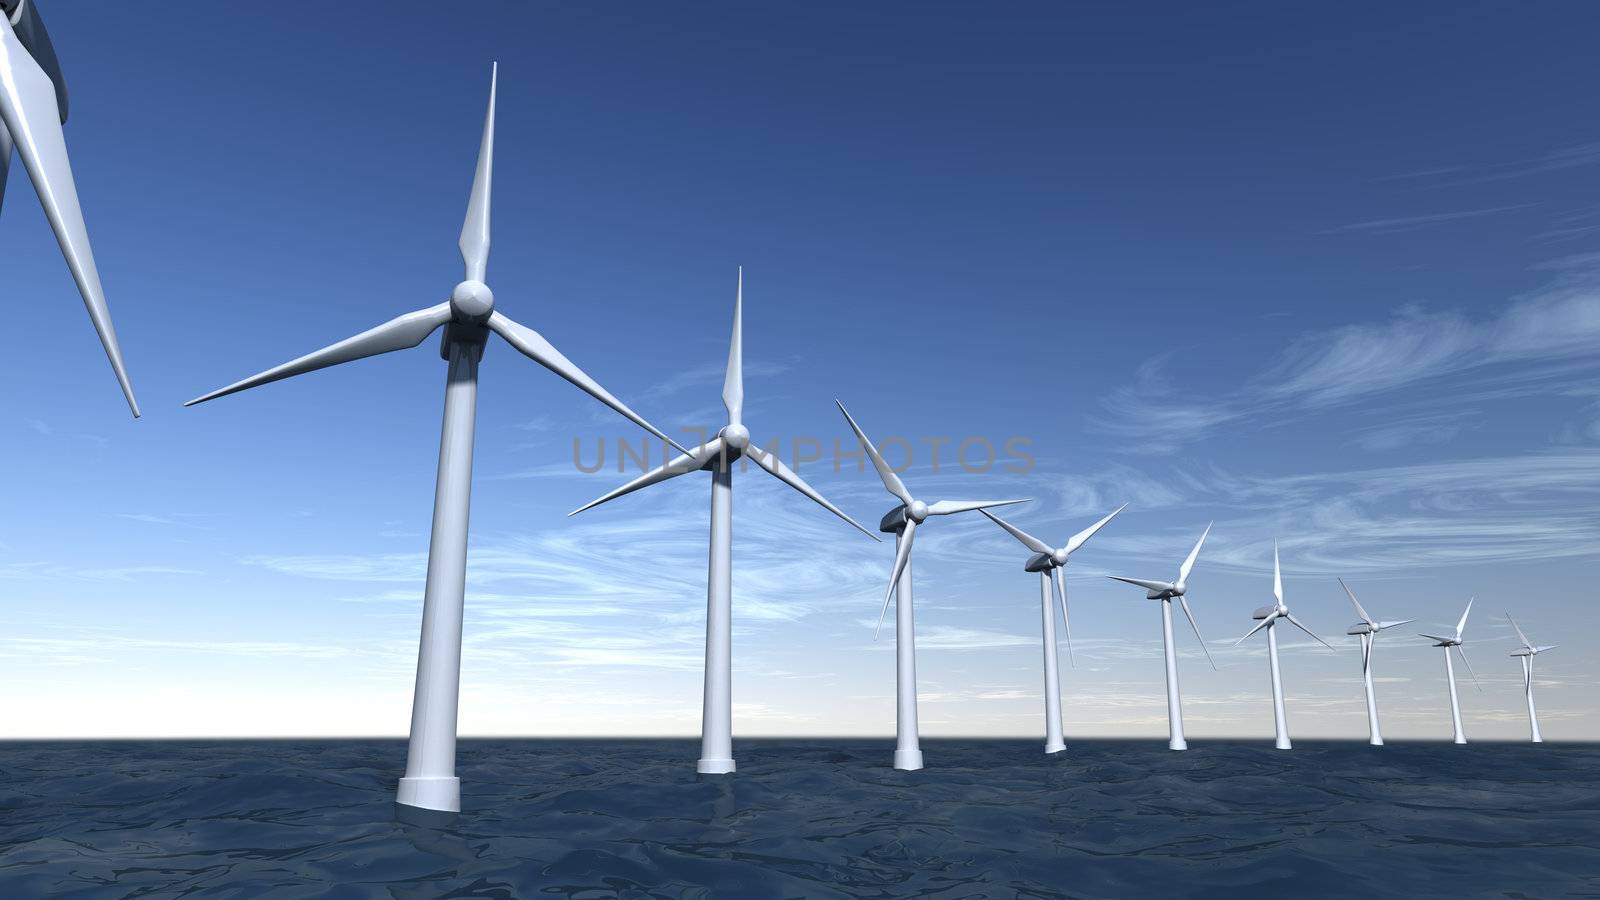 Seascape of offshore wind turbines with a blue sky